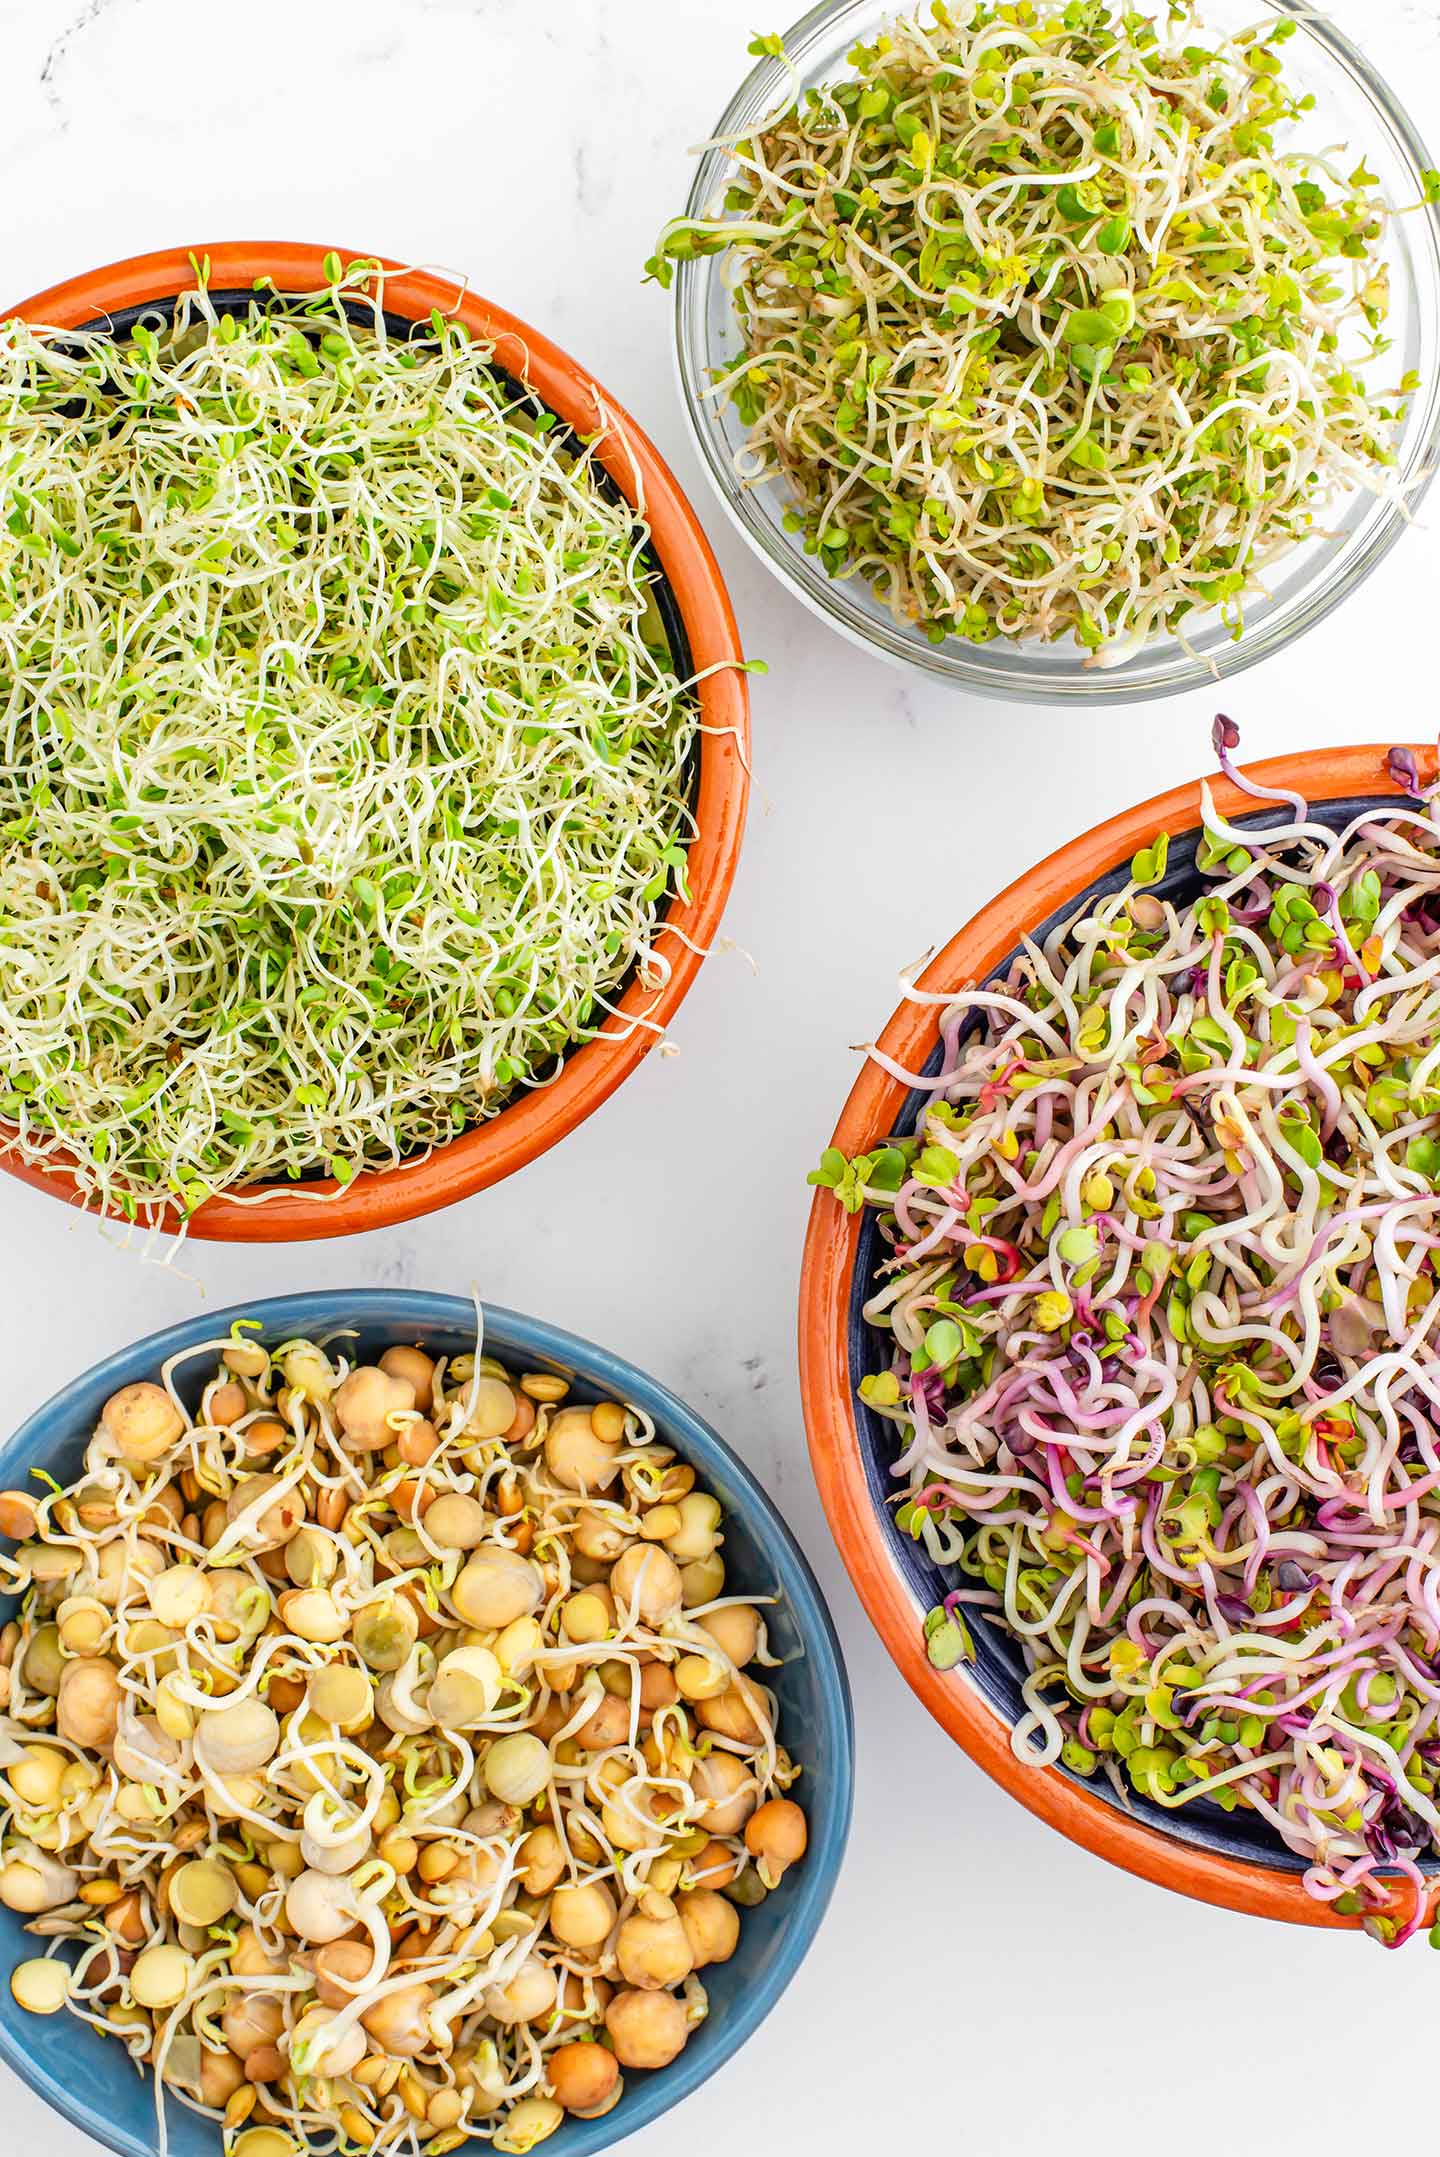 Top down view of four varieties of sprouts. In one bowl are sprouted beans, peas and lentils. Other bowls contain rainbow radish sprouts, broccoli sprouts, and a sandwich booster blend with alfalfa sprouts. 